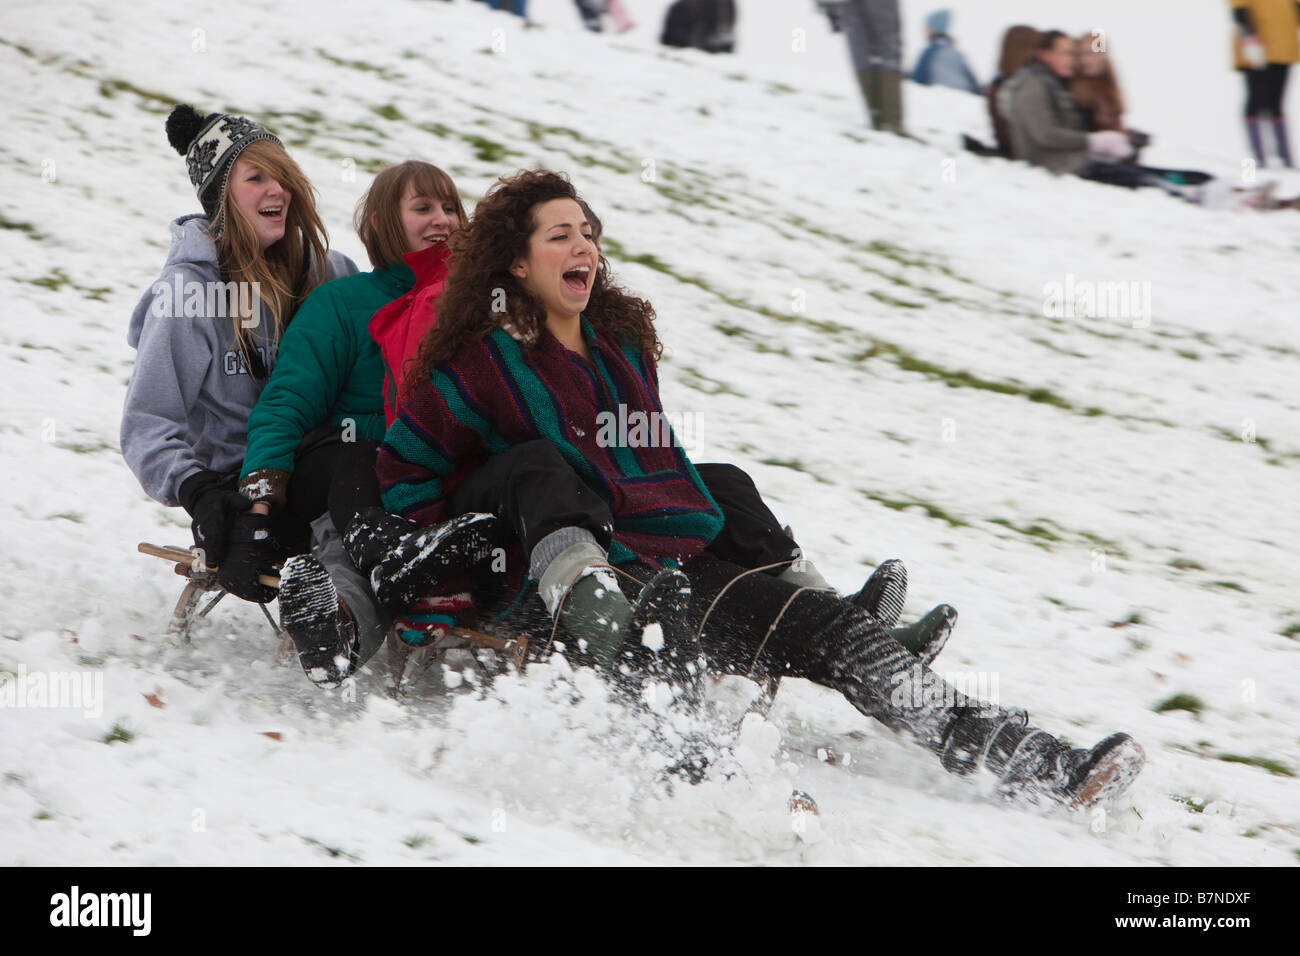 Teenagers play on new snowfalls at Alexandra Palace north London after schools have closed Stock Photo